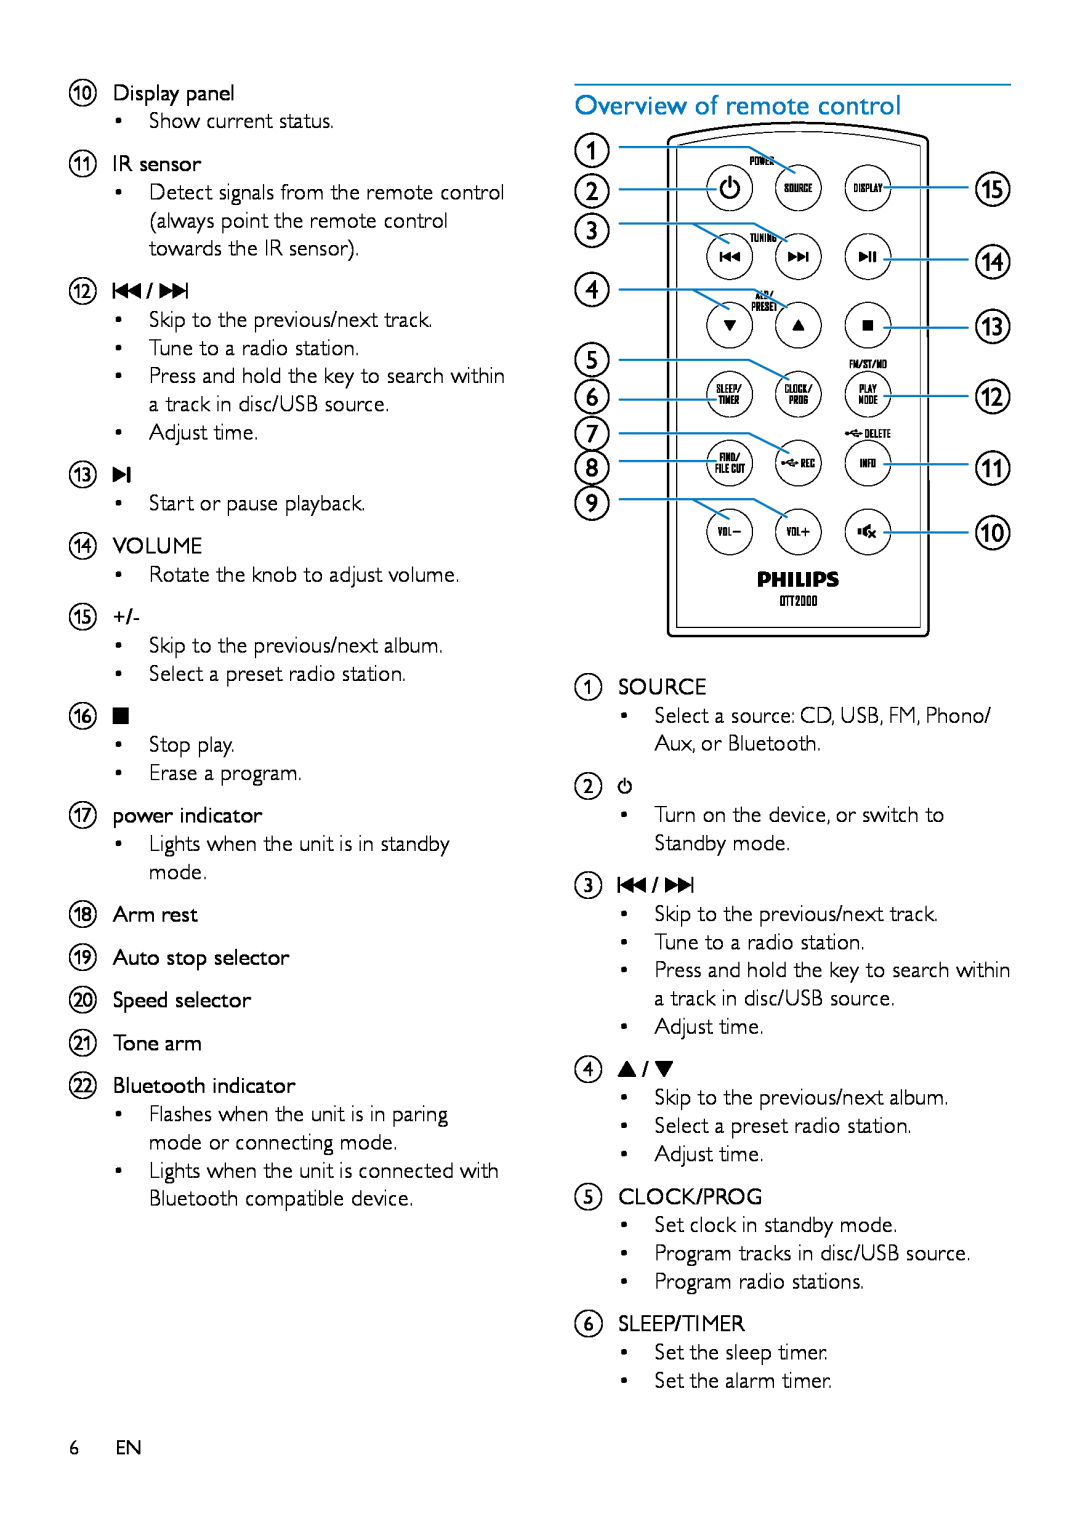 Philips OTT2000 user manual Overview of remote control, a bo, n d m, hk i j 